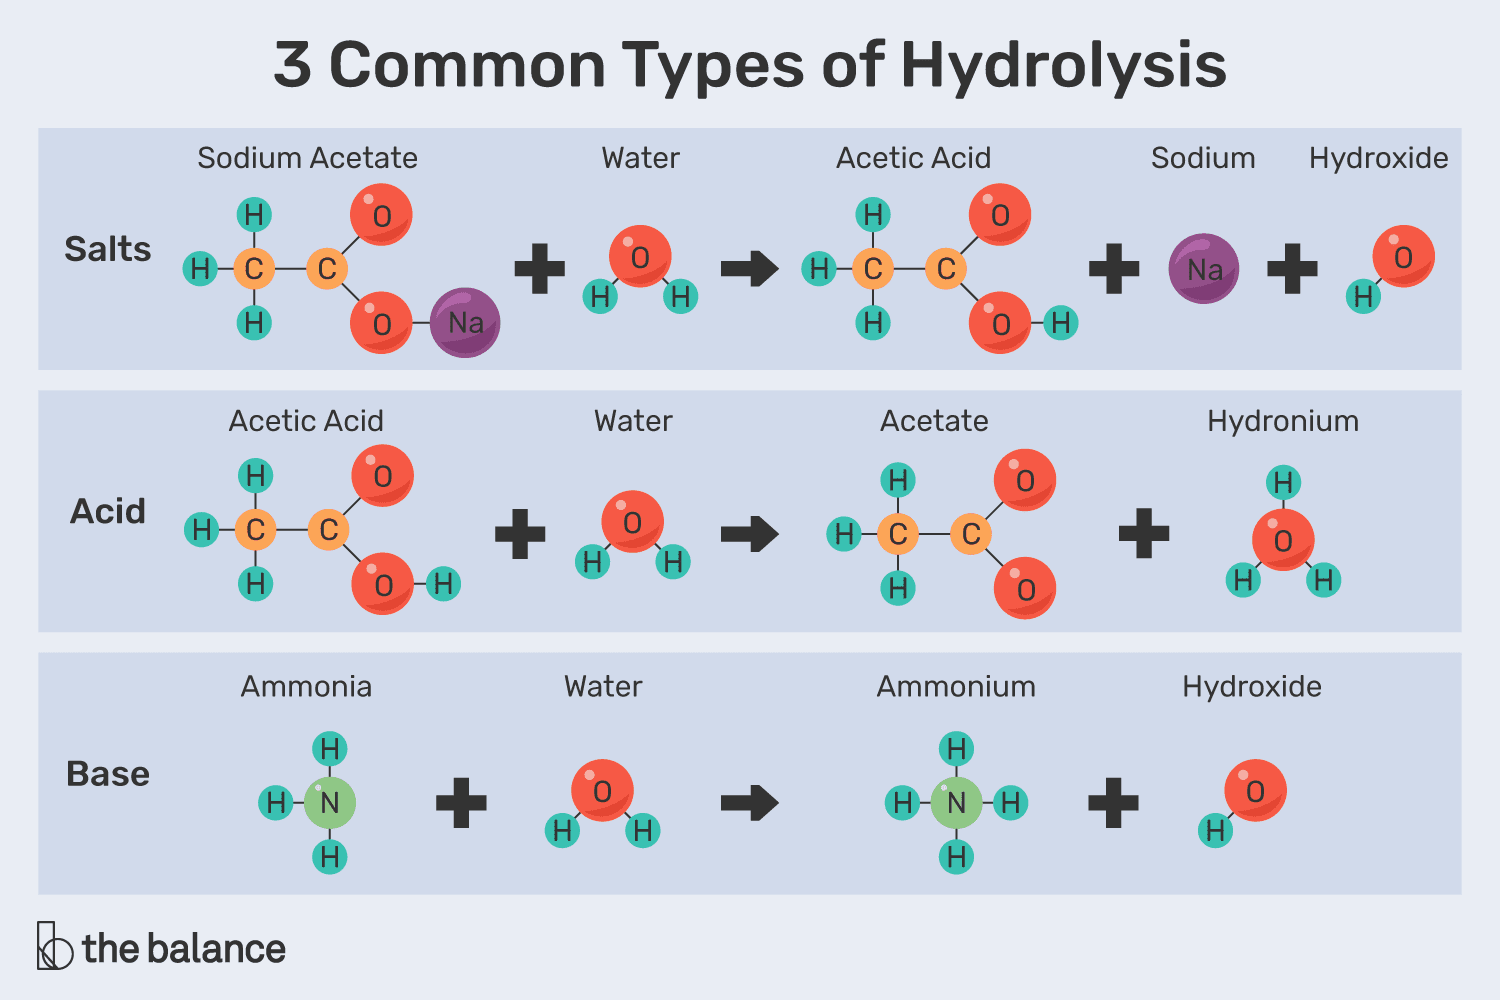 3 Common Types of Hydrolysis